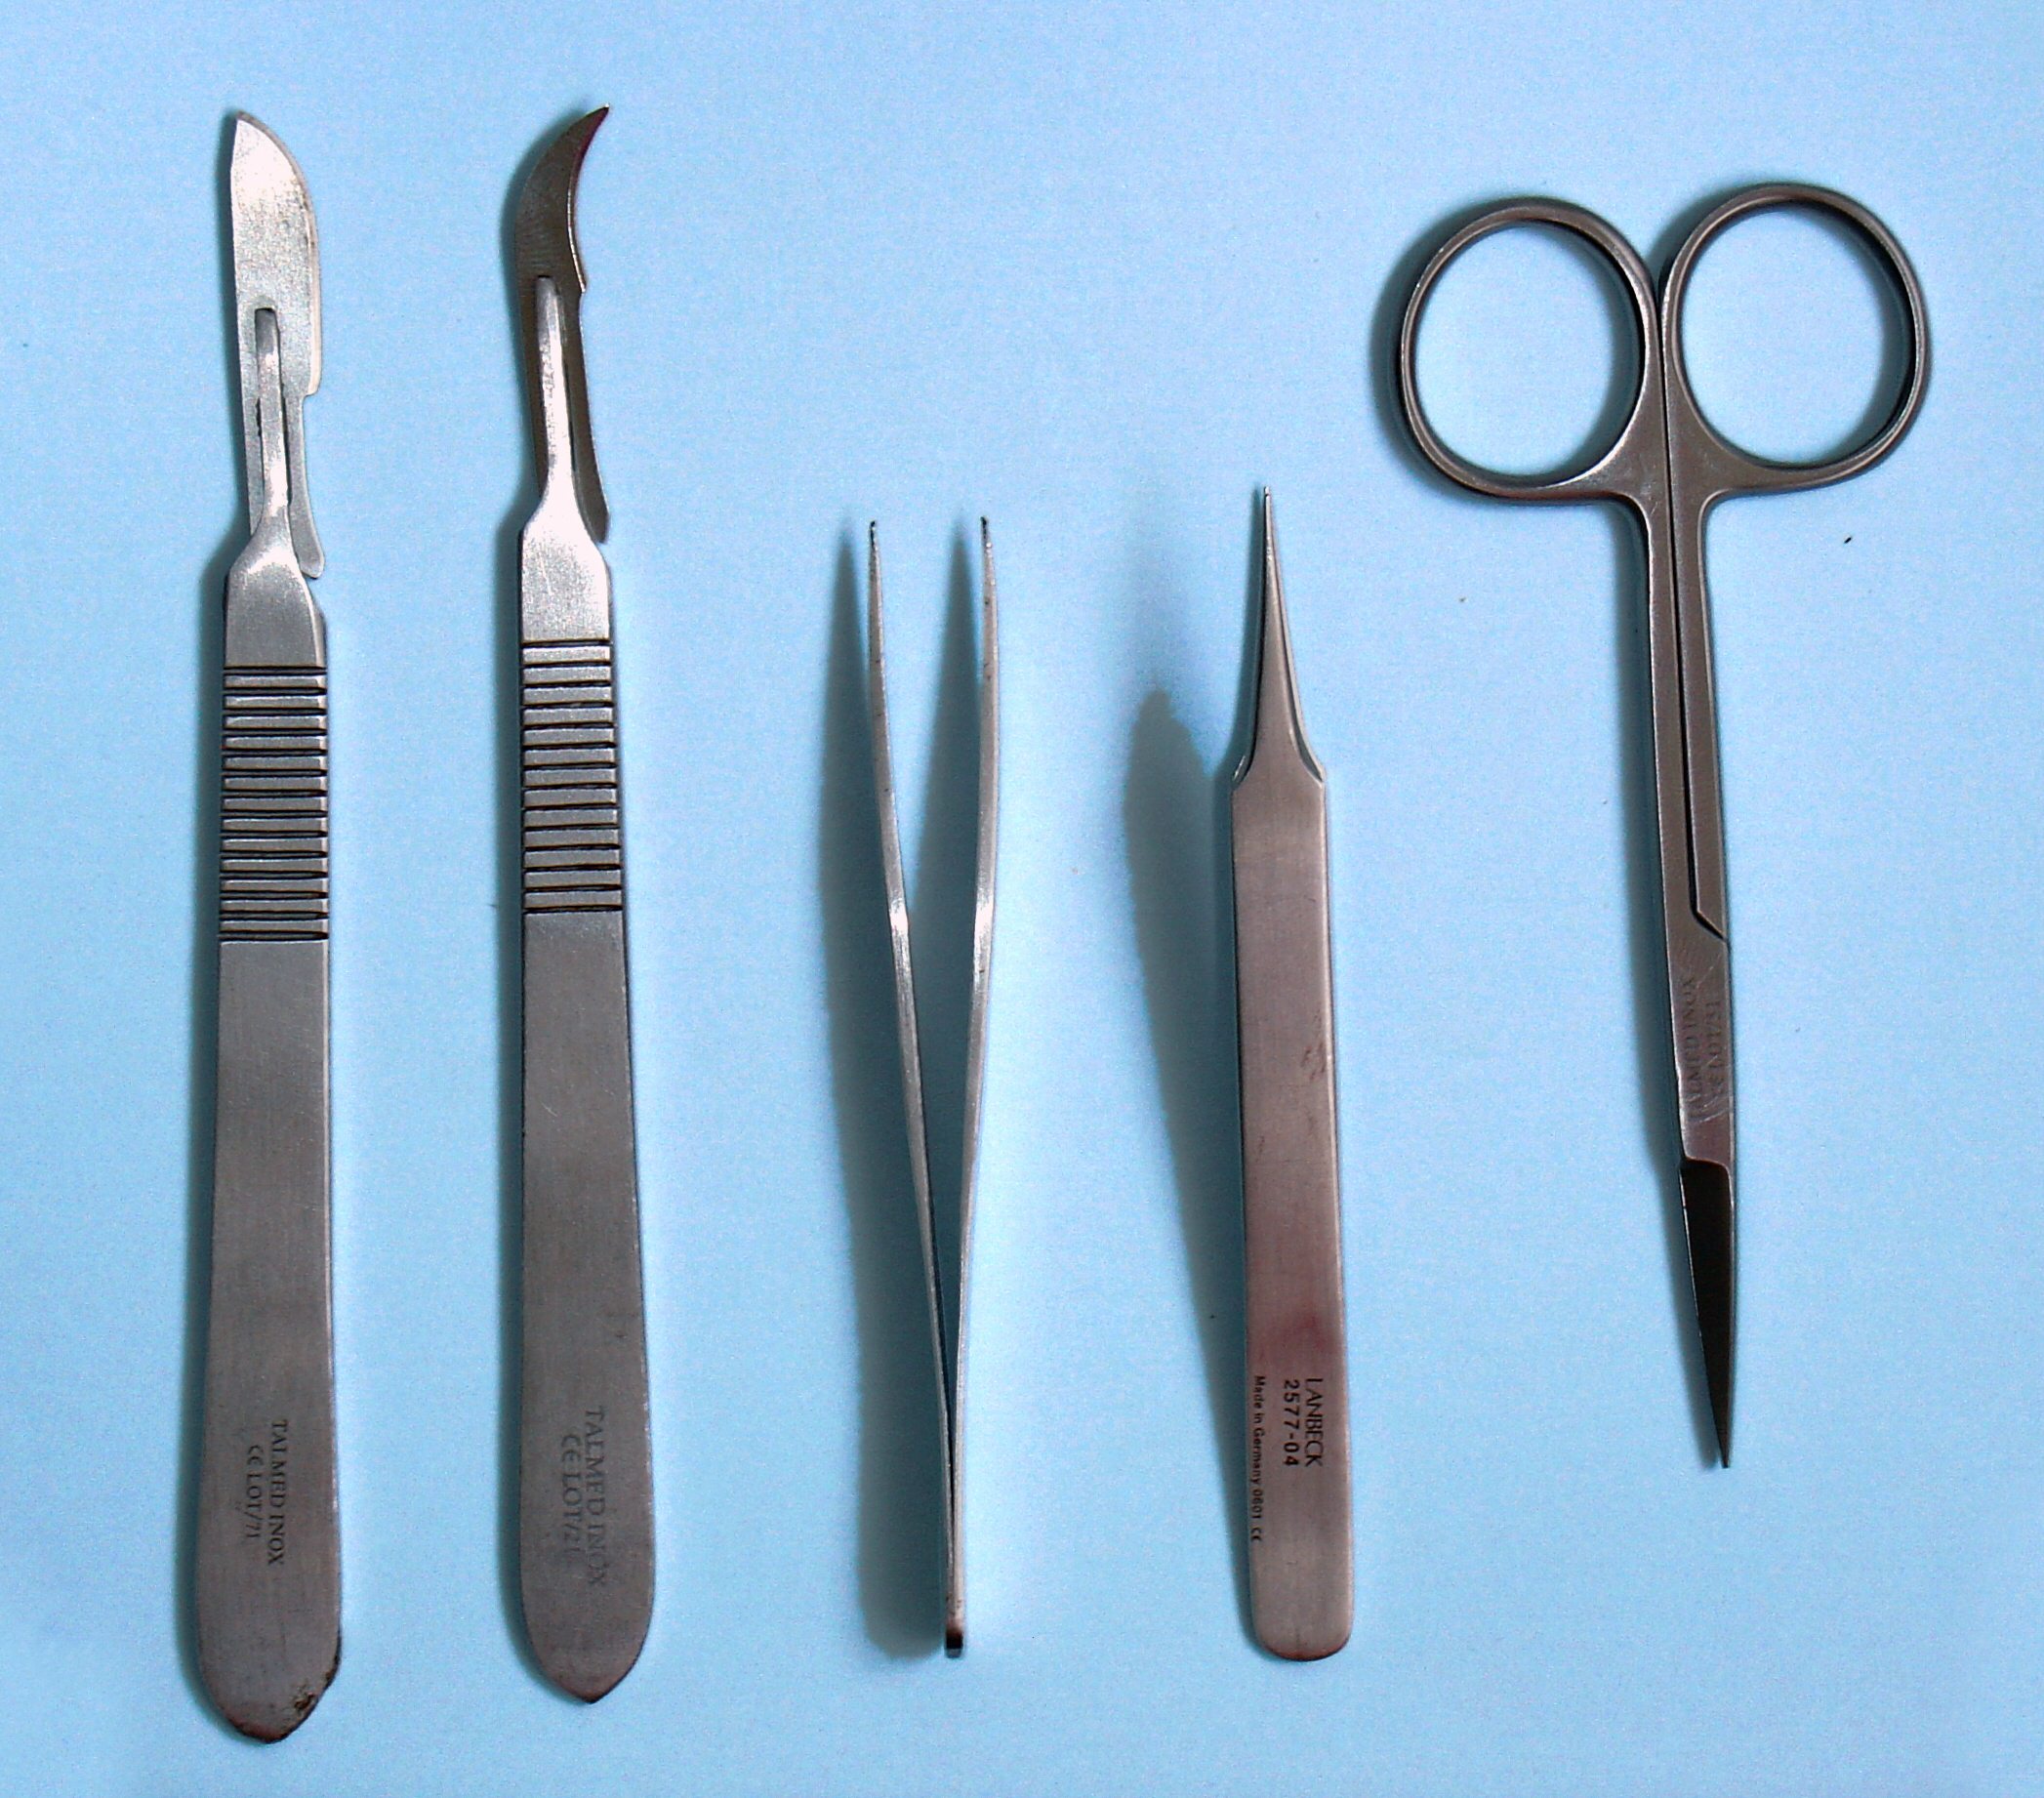 Five metal dissection tools, including scissors and tweezers, appear on a blue background.